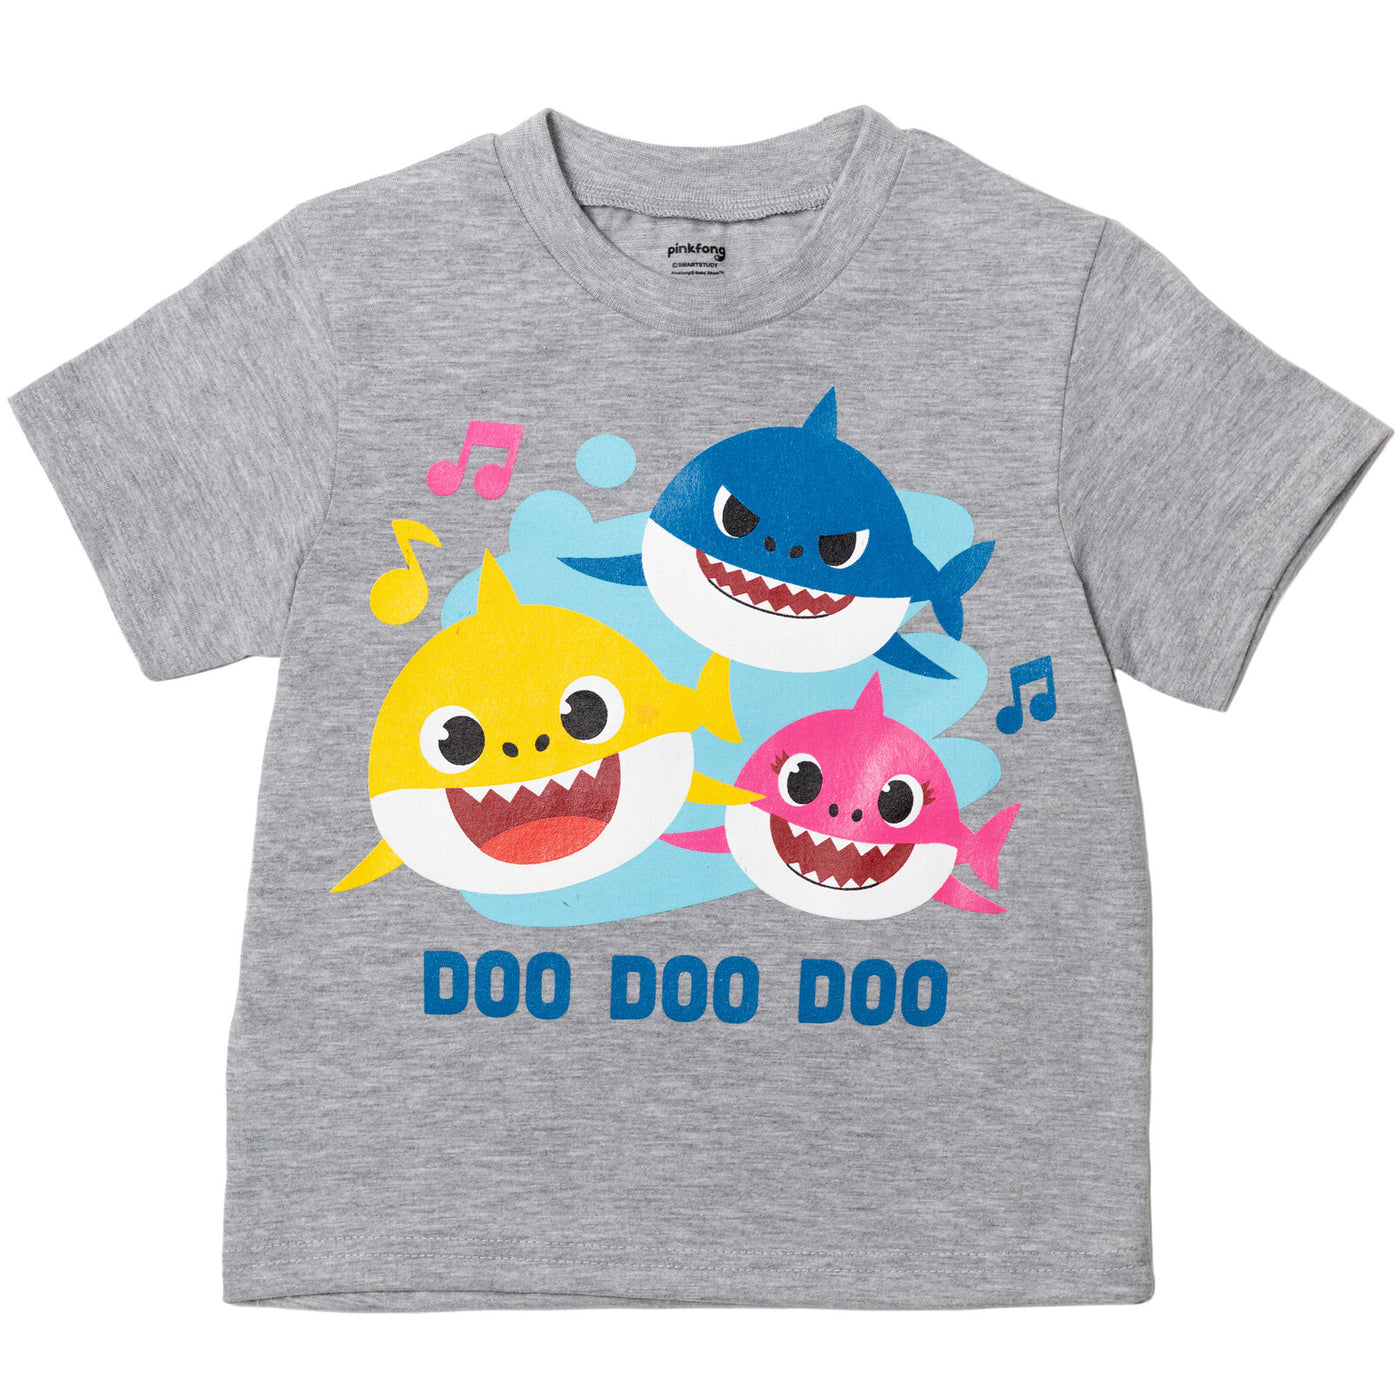 Pinkfong Baby Shark T-Shirt and Mesh Shorts Outfit Set